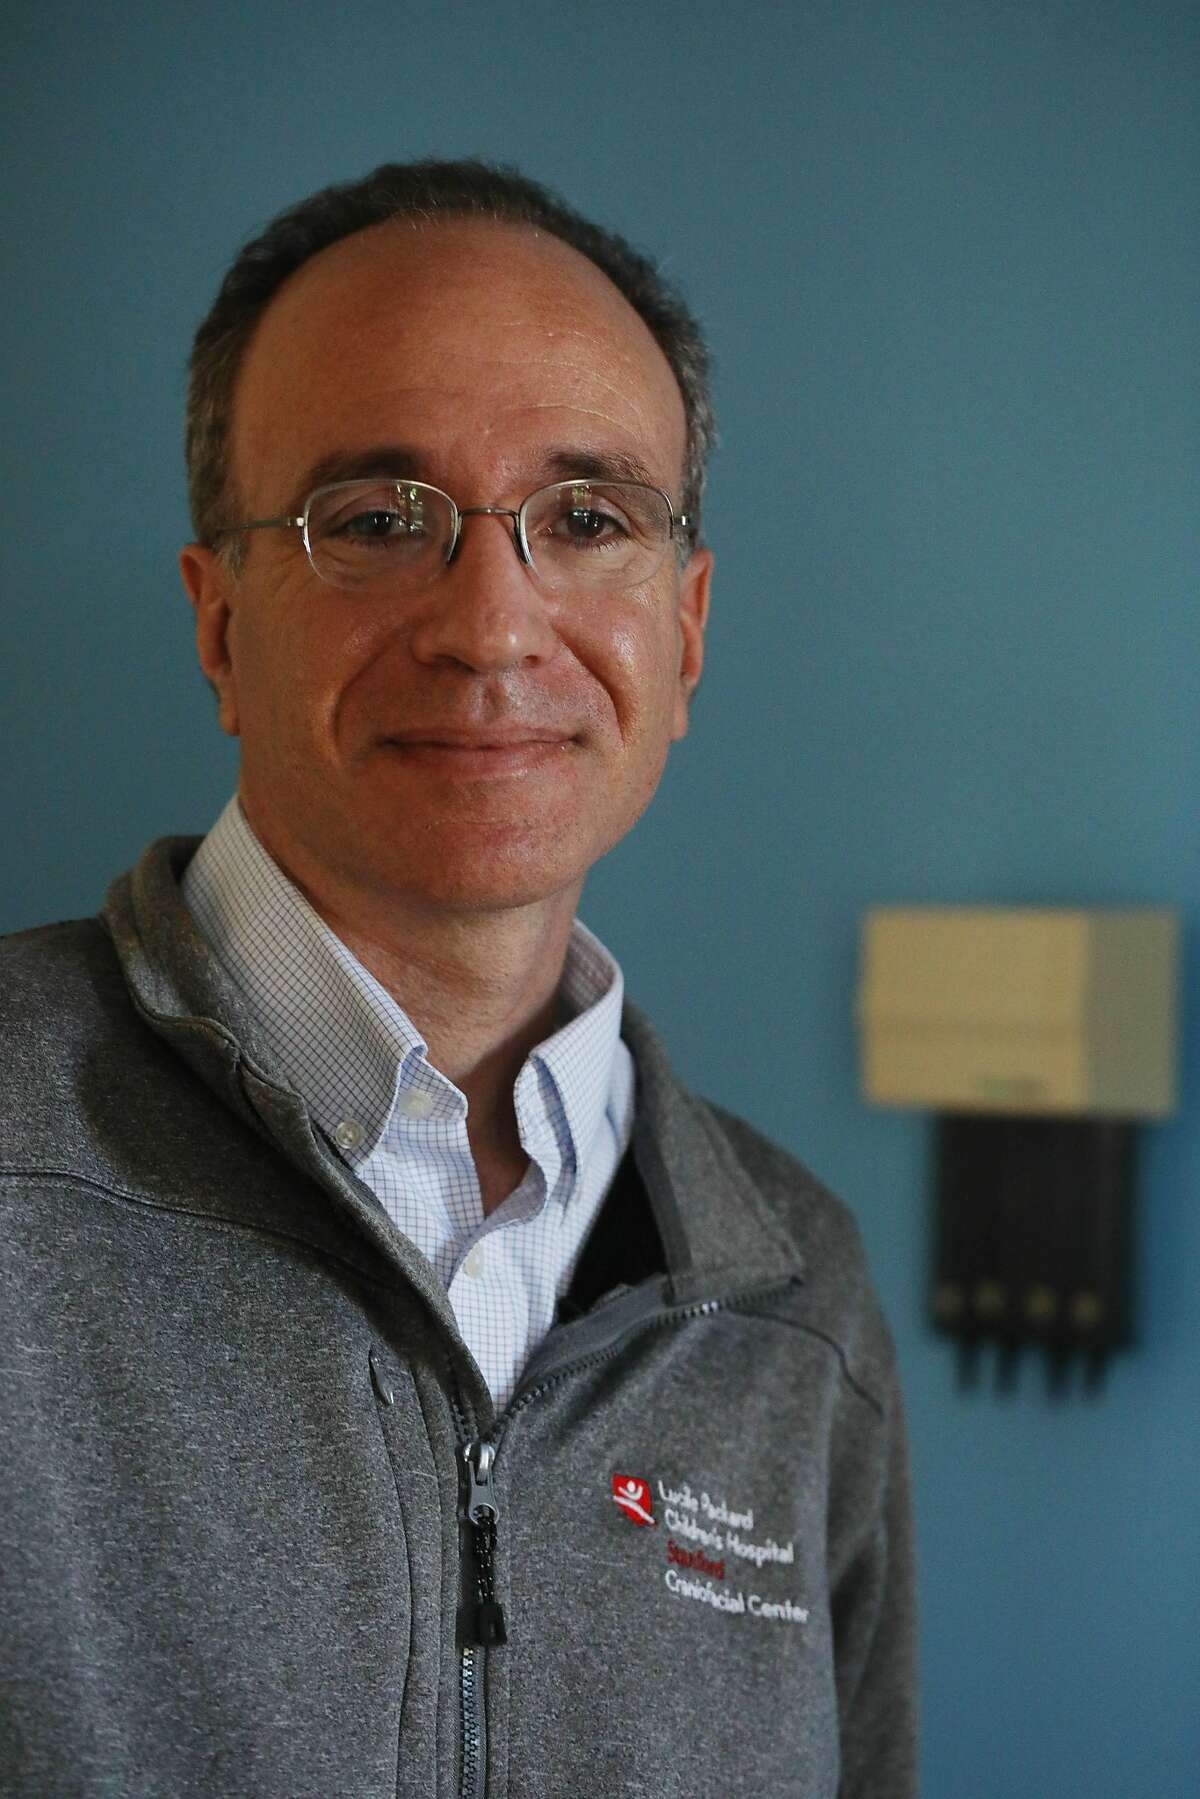 Dr. Jon Bernstein, pediatric medical director for Stanford Center for Undiasgnosed Disease, stands for a portrait at Luciele Packard Children's Hospital Outpatient Clinic on Wednesday, October 10, 2018 in Stanford.